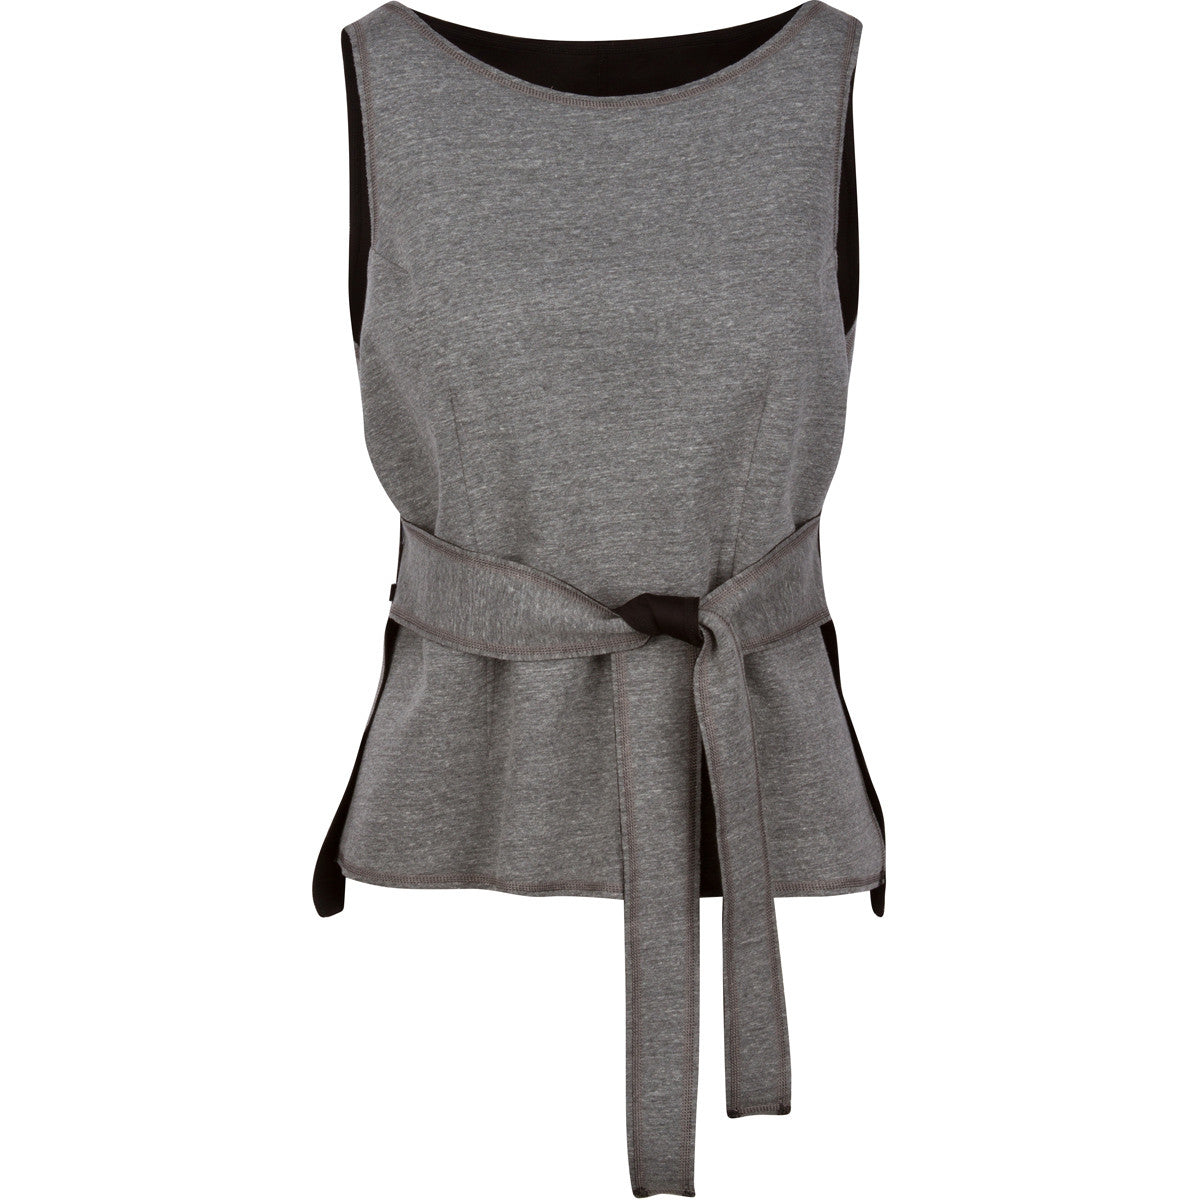 The "Geme" Reversible Tunic